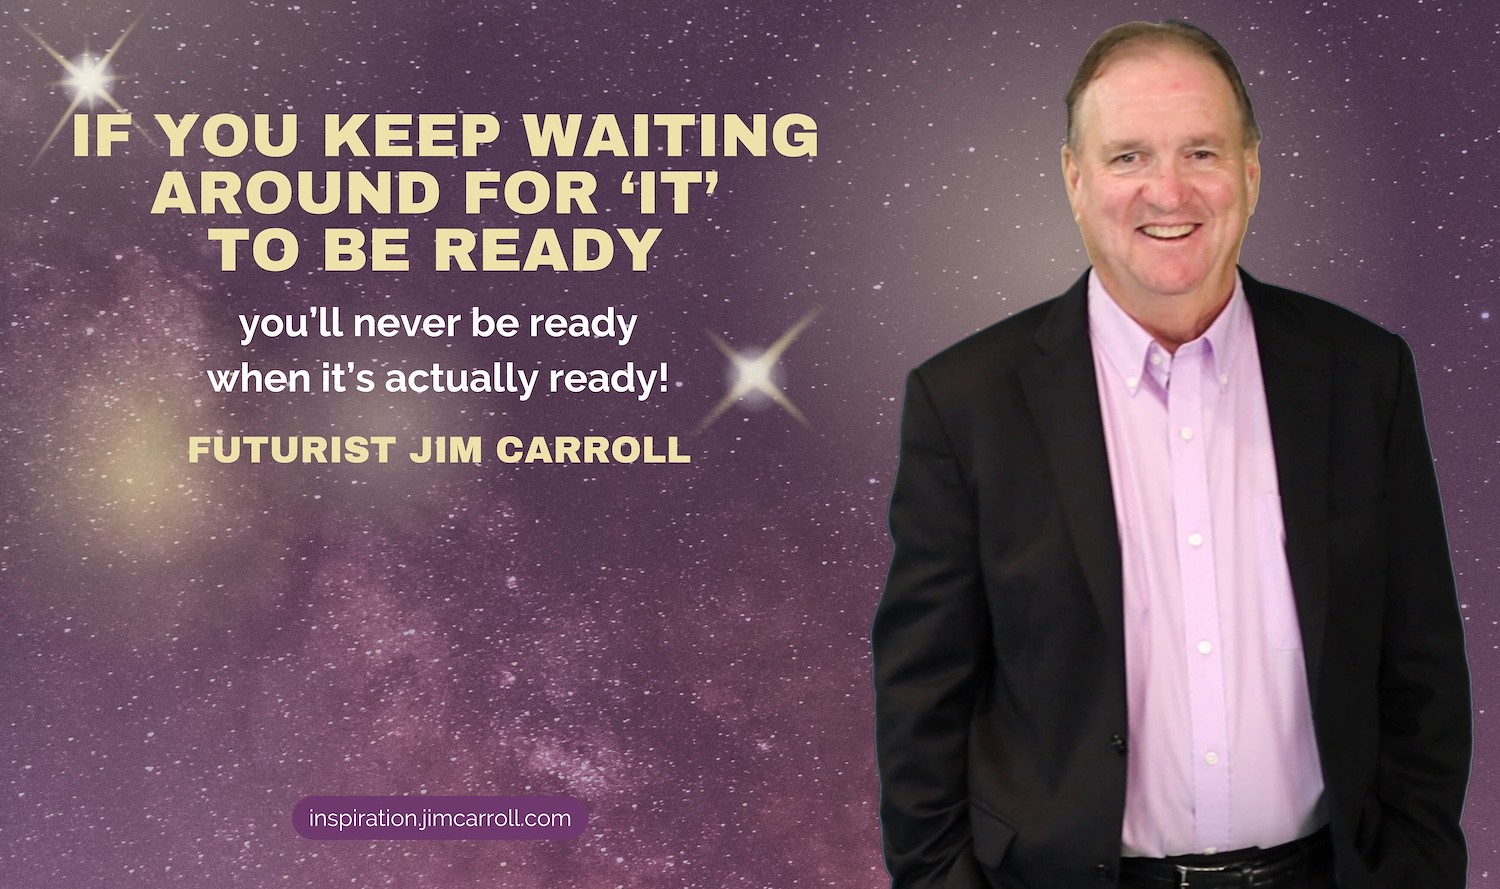 Daily Inspiration: "If you keep waiting around for 'it' to be ready you'll never be ready when it's actually ready!" - Futurist Jim Carroll